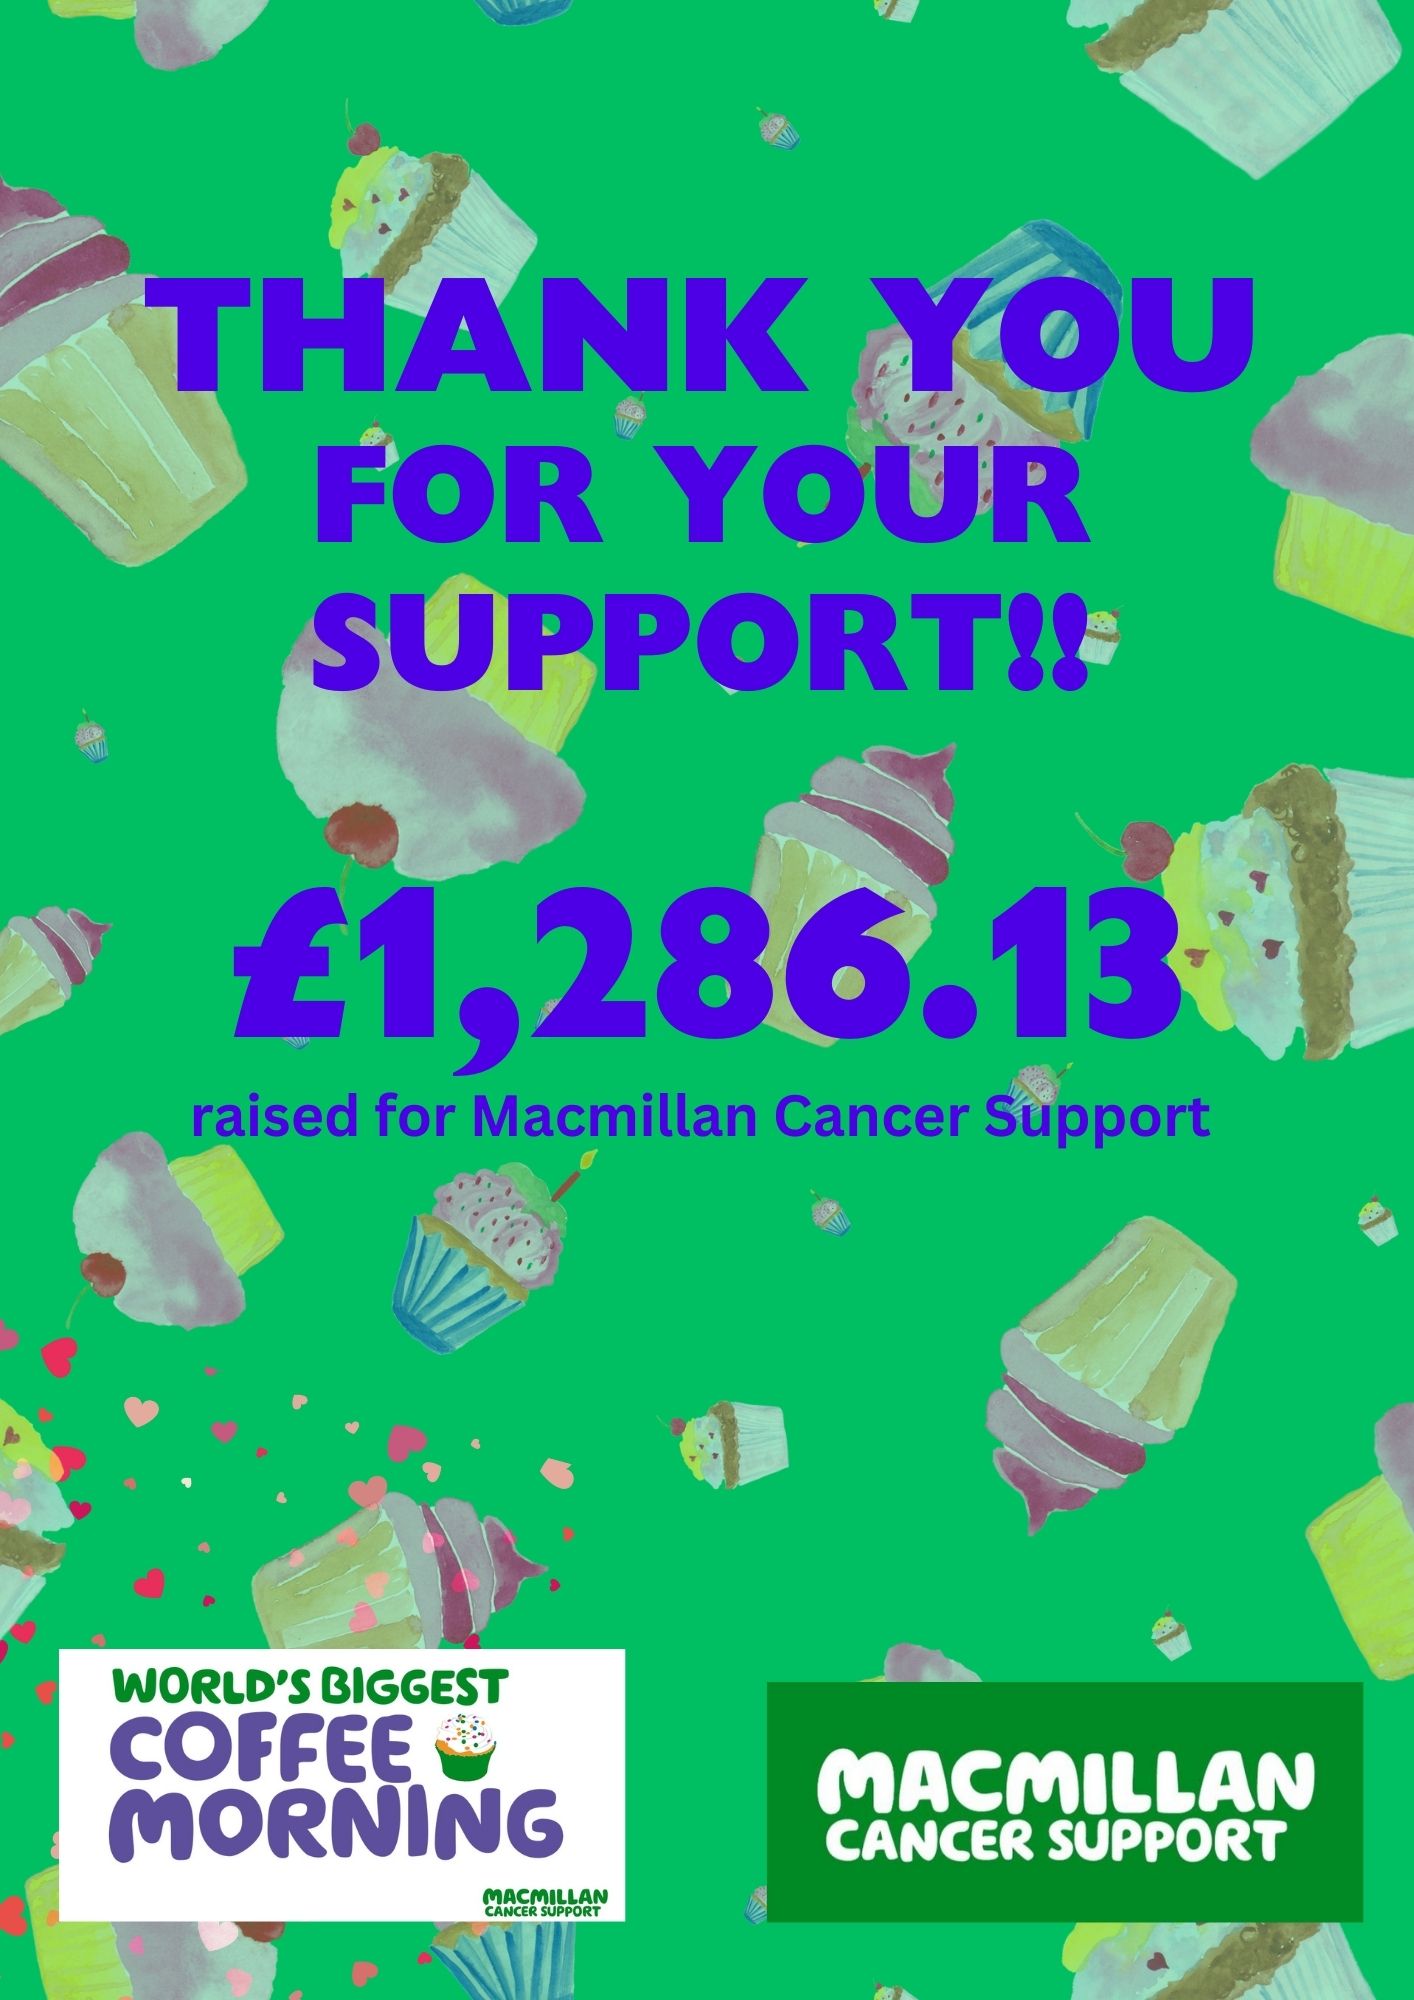 Thank you to everyone who supported our coffee morning, together we raised an astounding £1,286.13